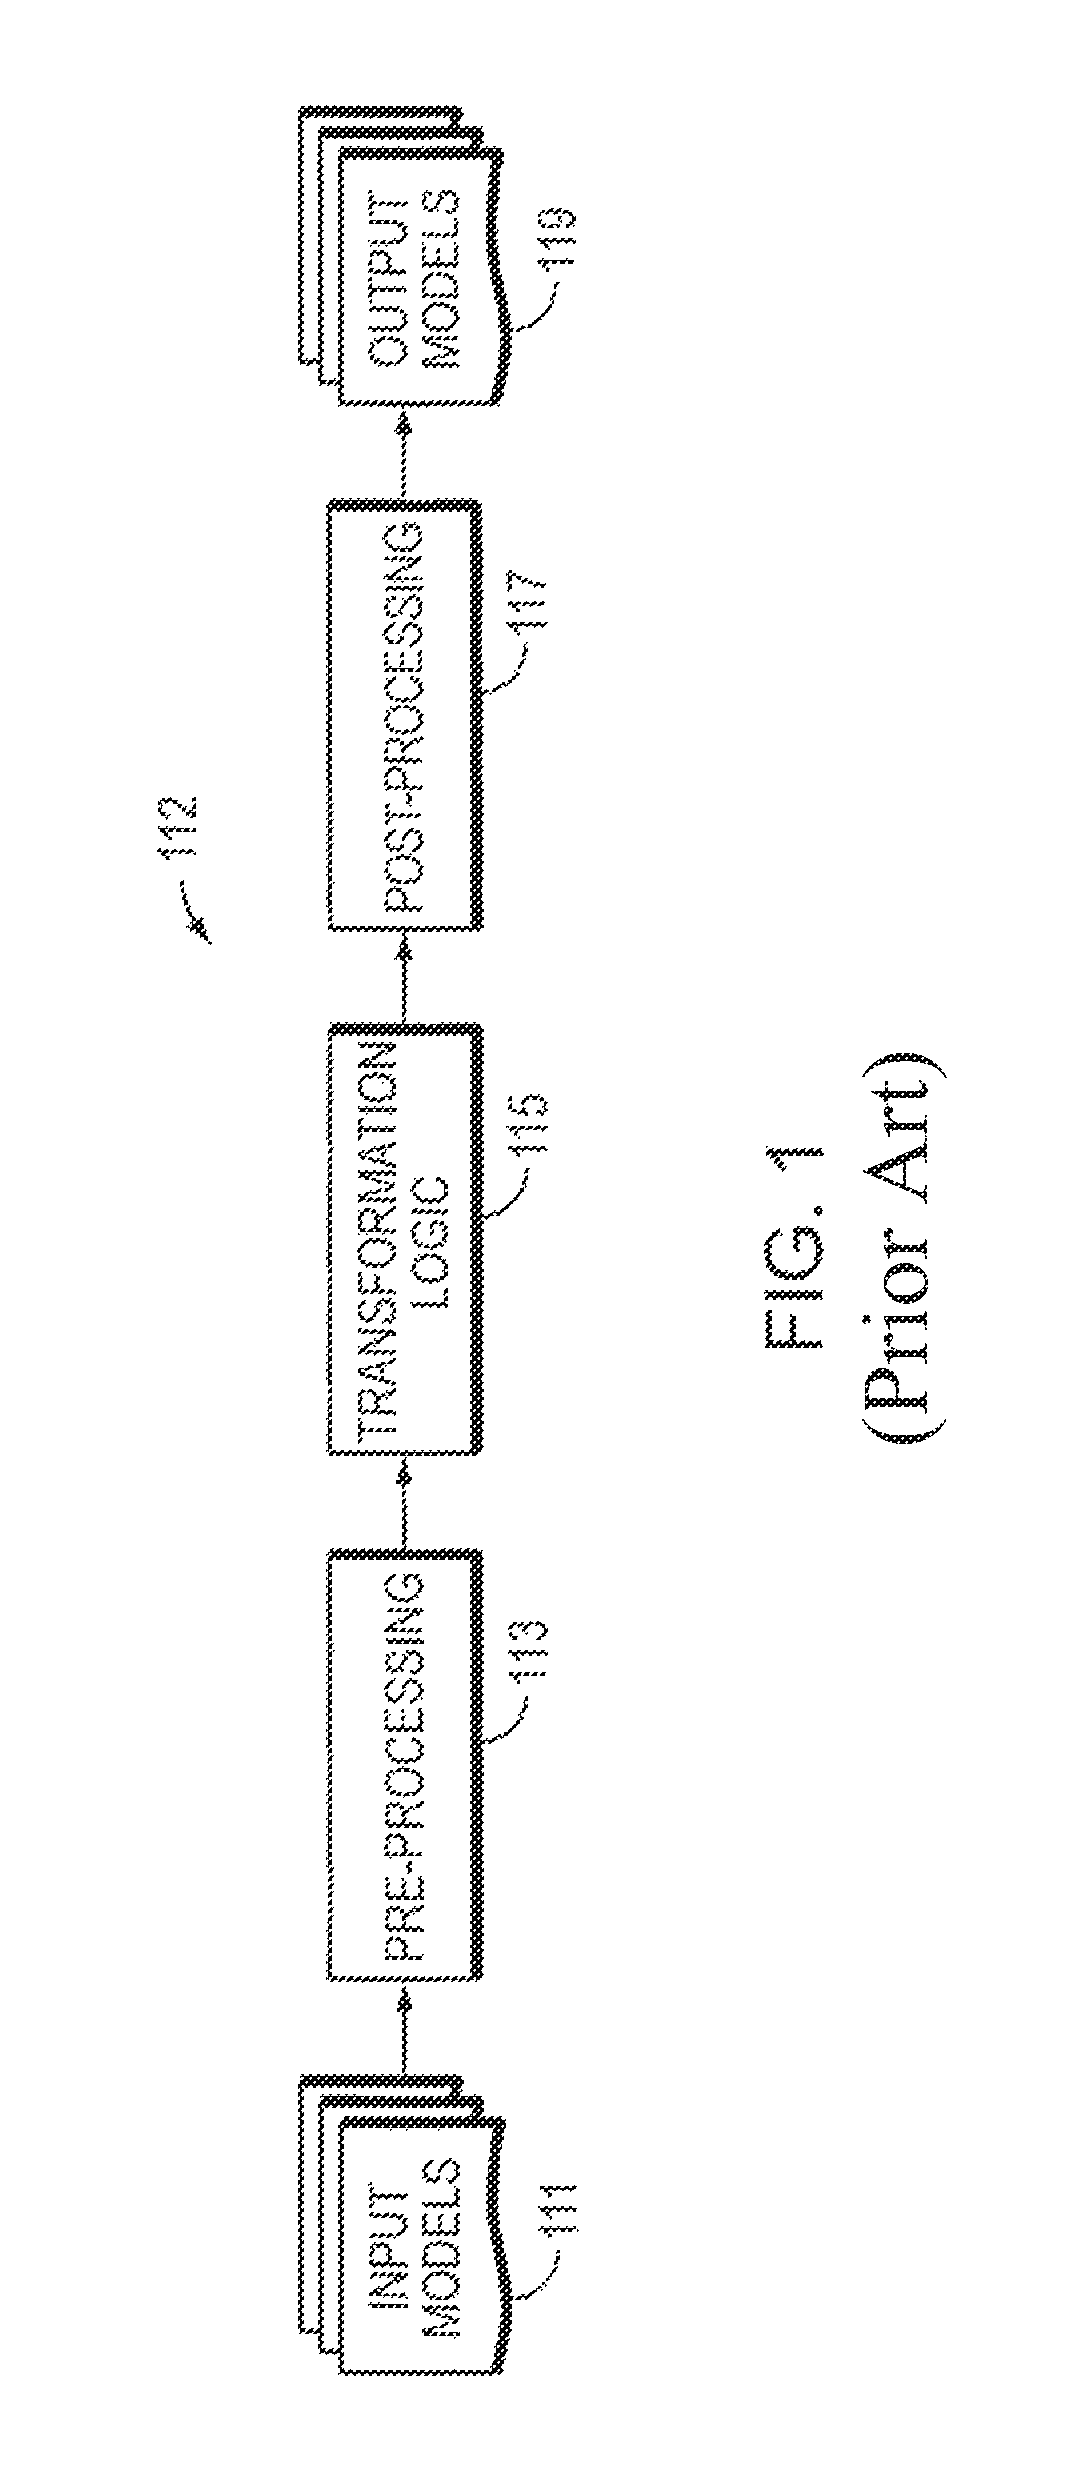 Computer method and apparatus for chaining of model-to-model transformations